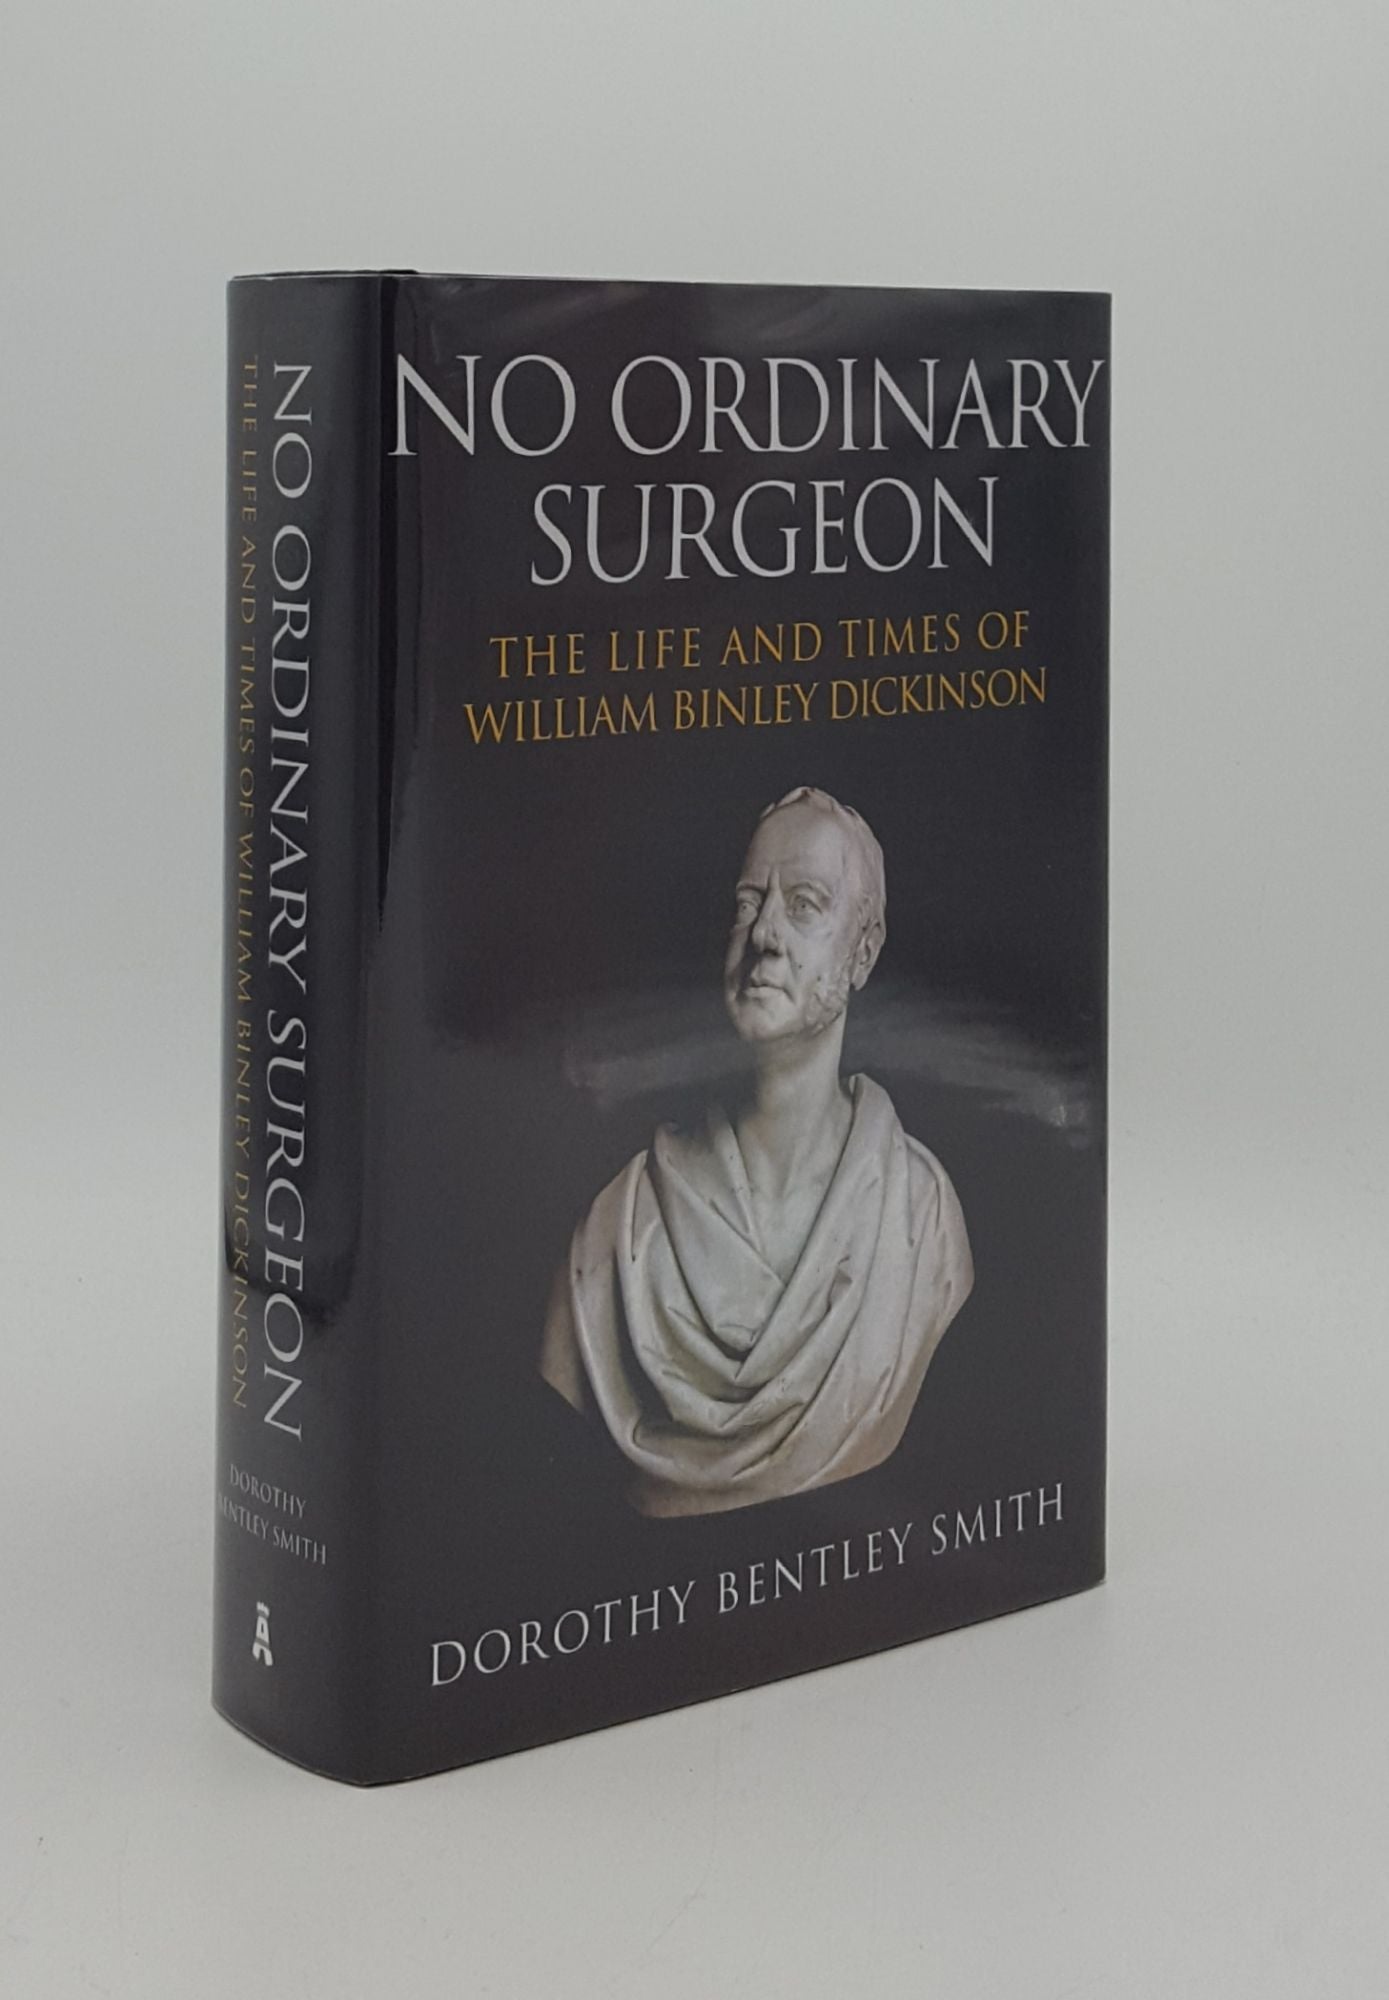 SMITH Dorothy Bentley - No Ordinary Surgeon the Life and Times of William Binley Dickinson